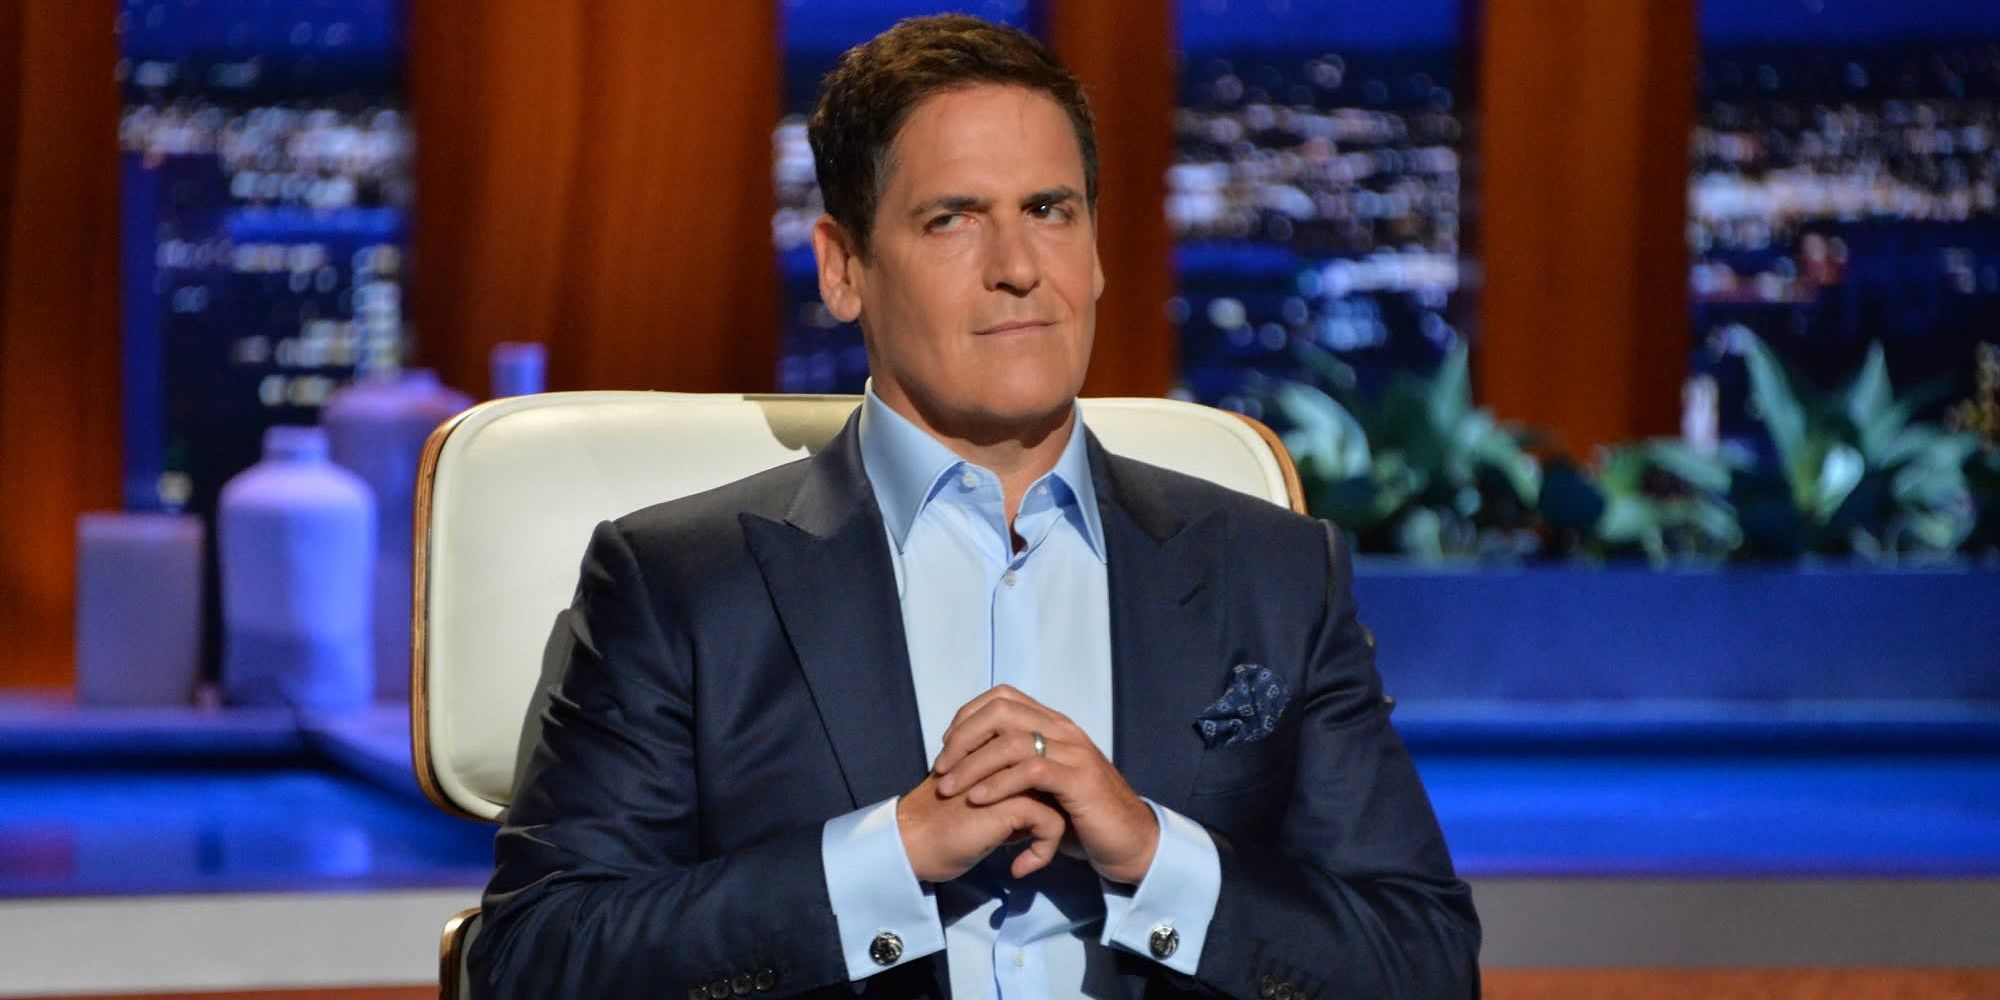 Shark Tank season 3 shooting begins, check release date, streaming and more